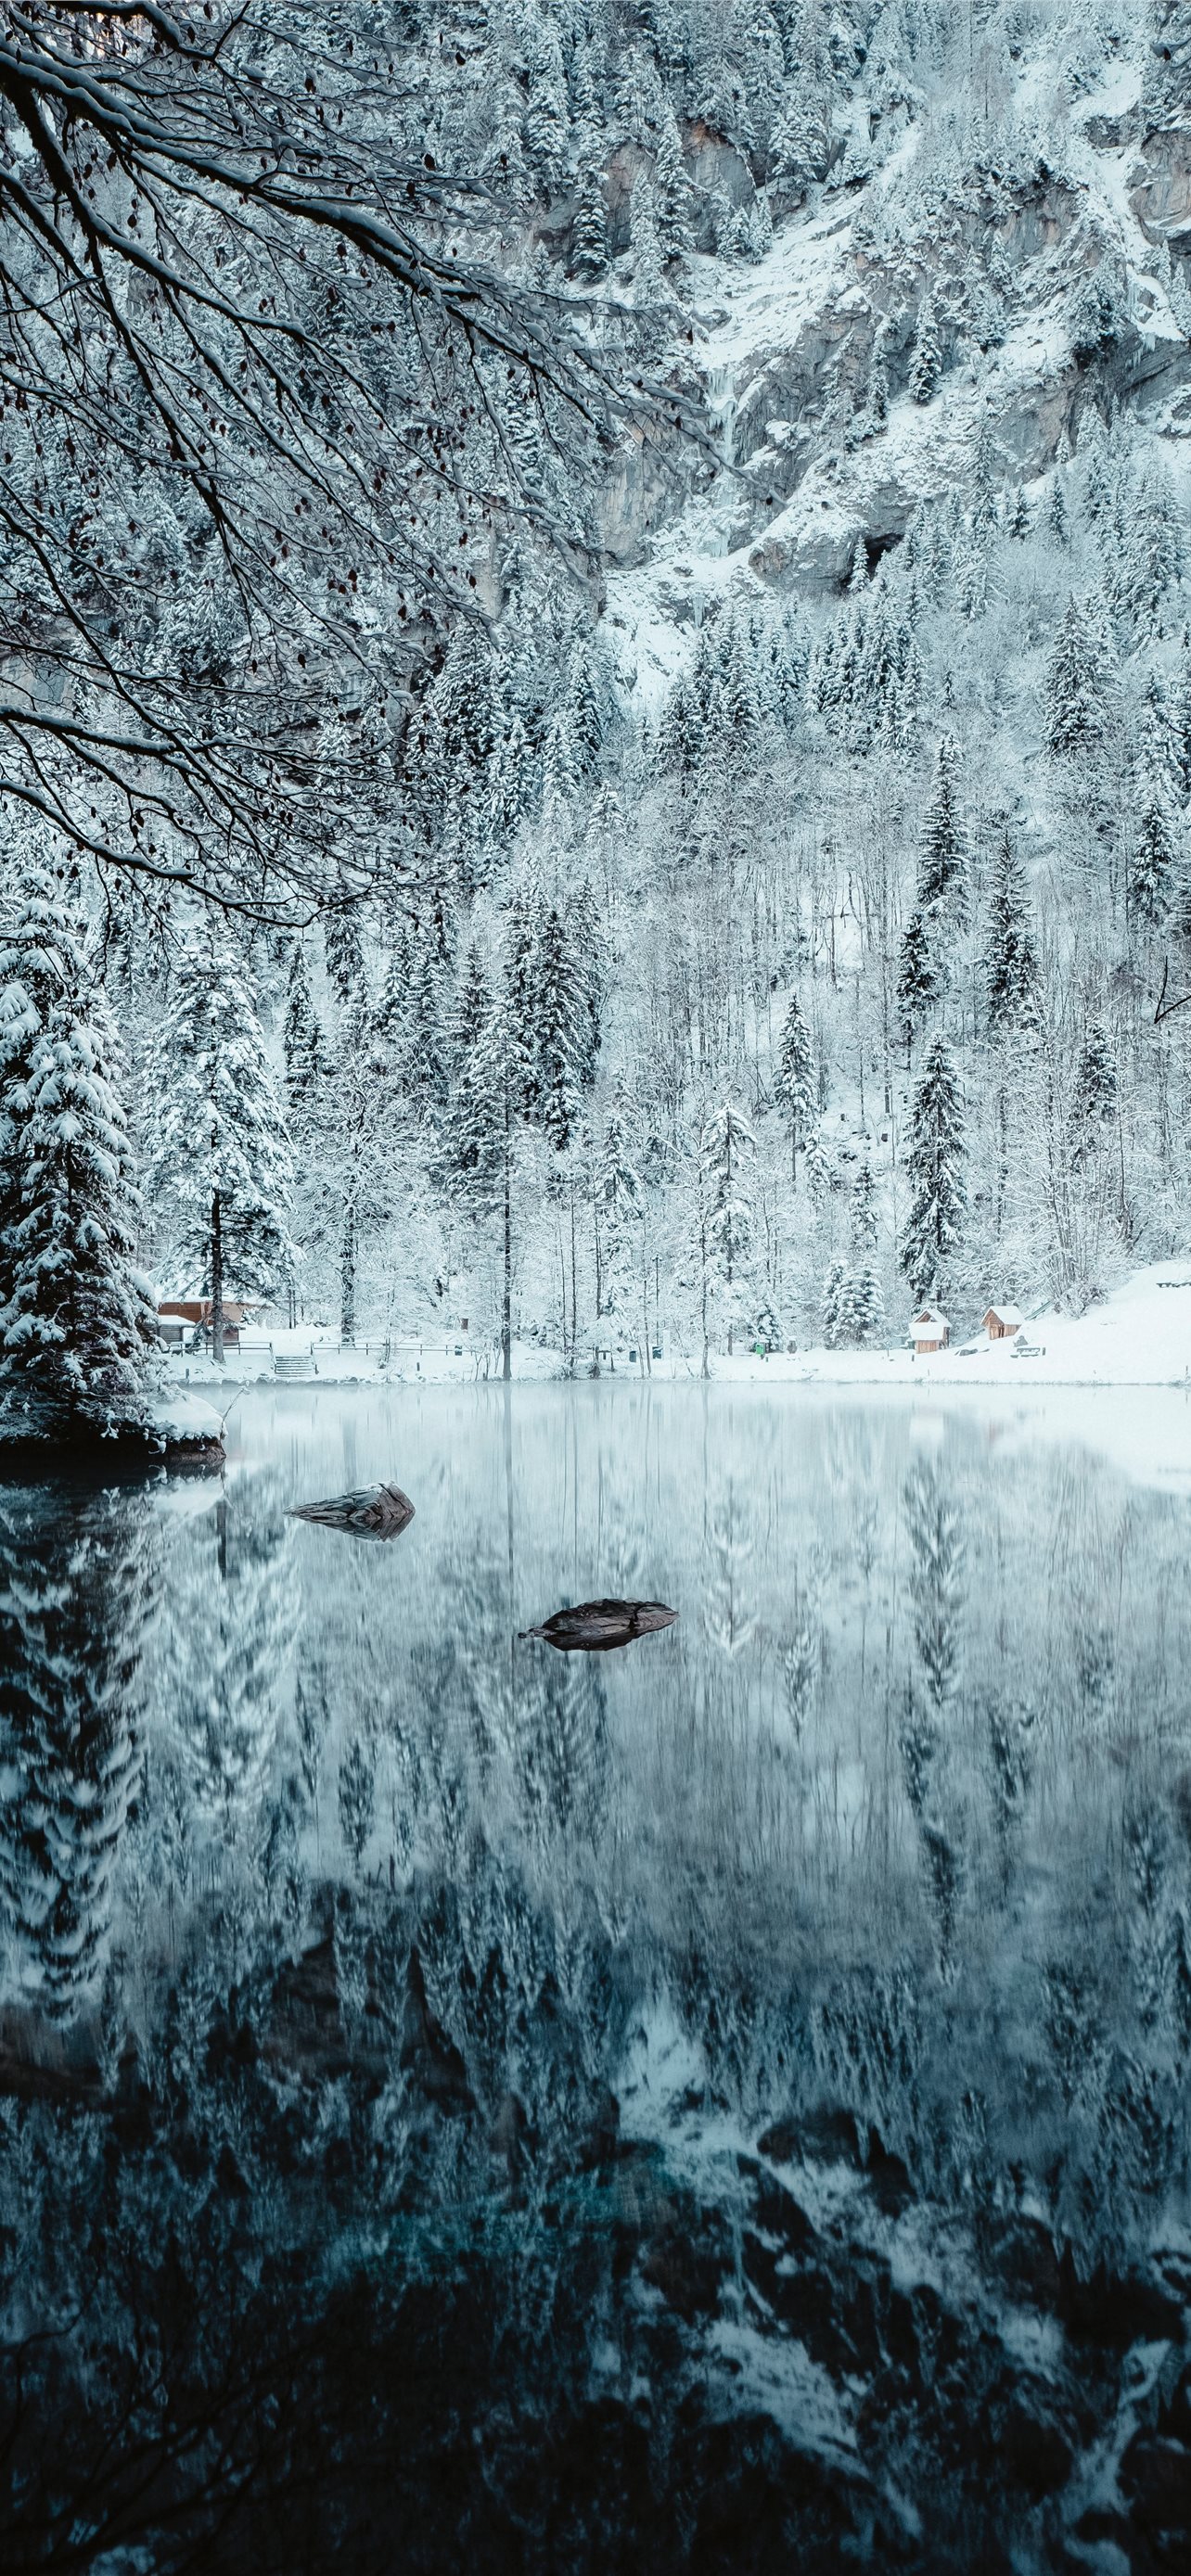 Free winter wallpapers for download - Meks